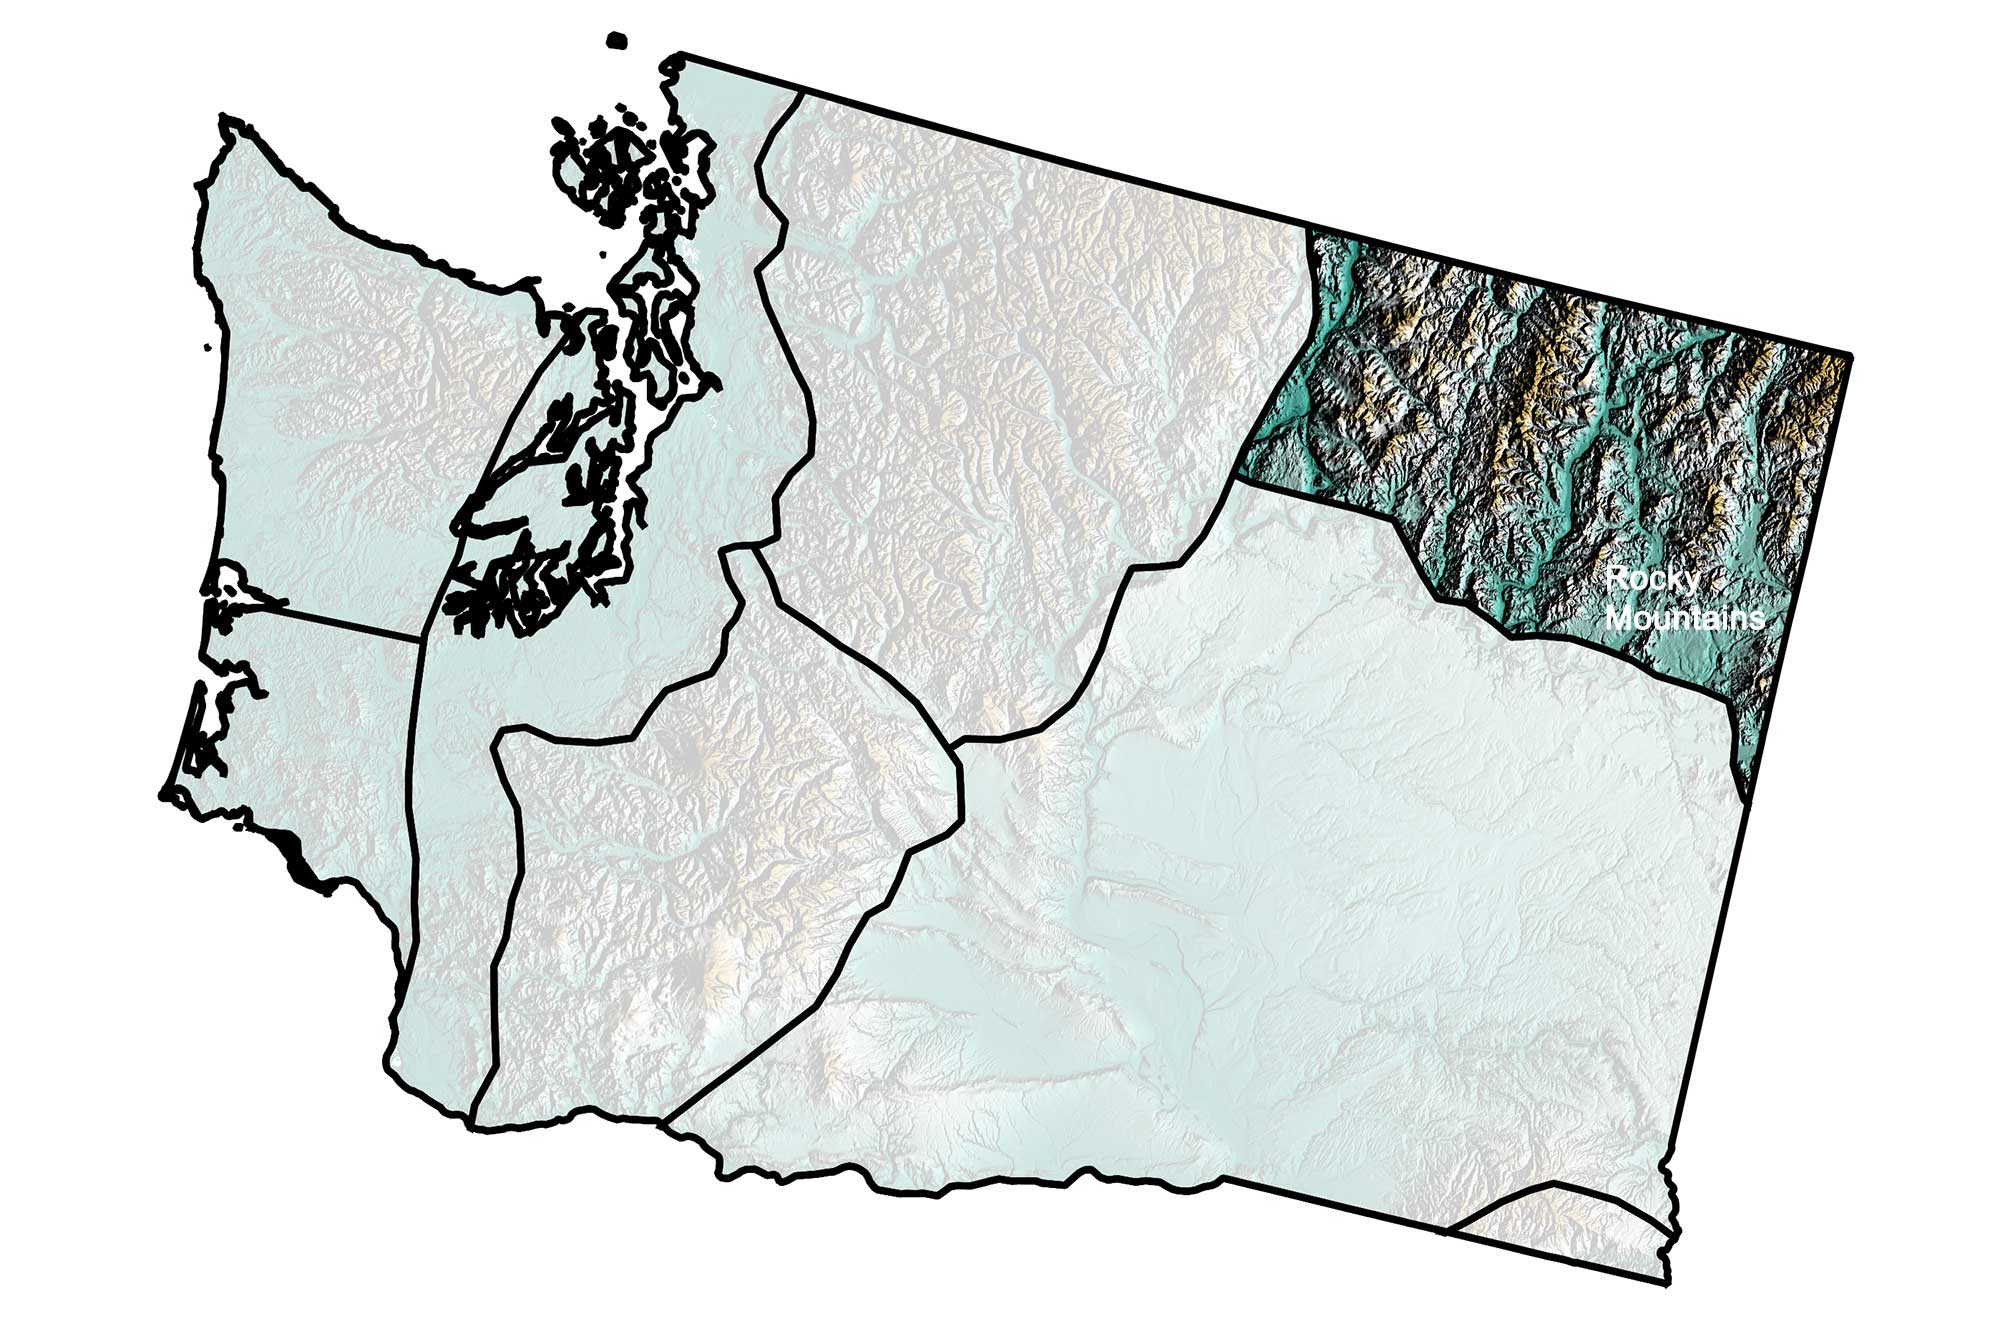 Map showing the topography of the Rocky Mountains region of Washington State.